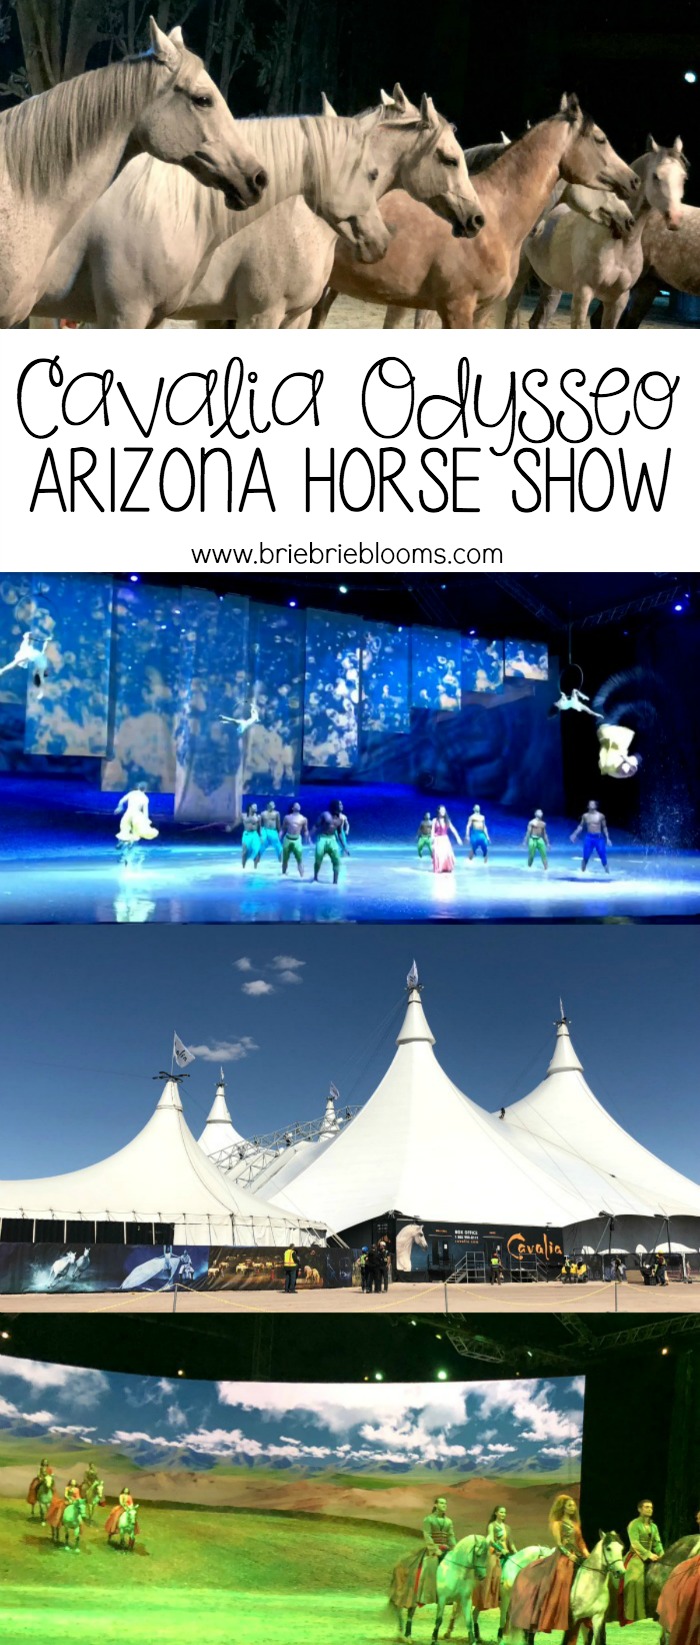 The Cavalia Odysseo Arizona horse show is 2/21-3/18, 2018 under the "White Big Top" in Scottsdale featuring over 110 artists and horses.